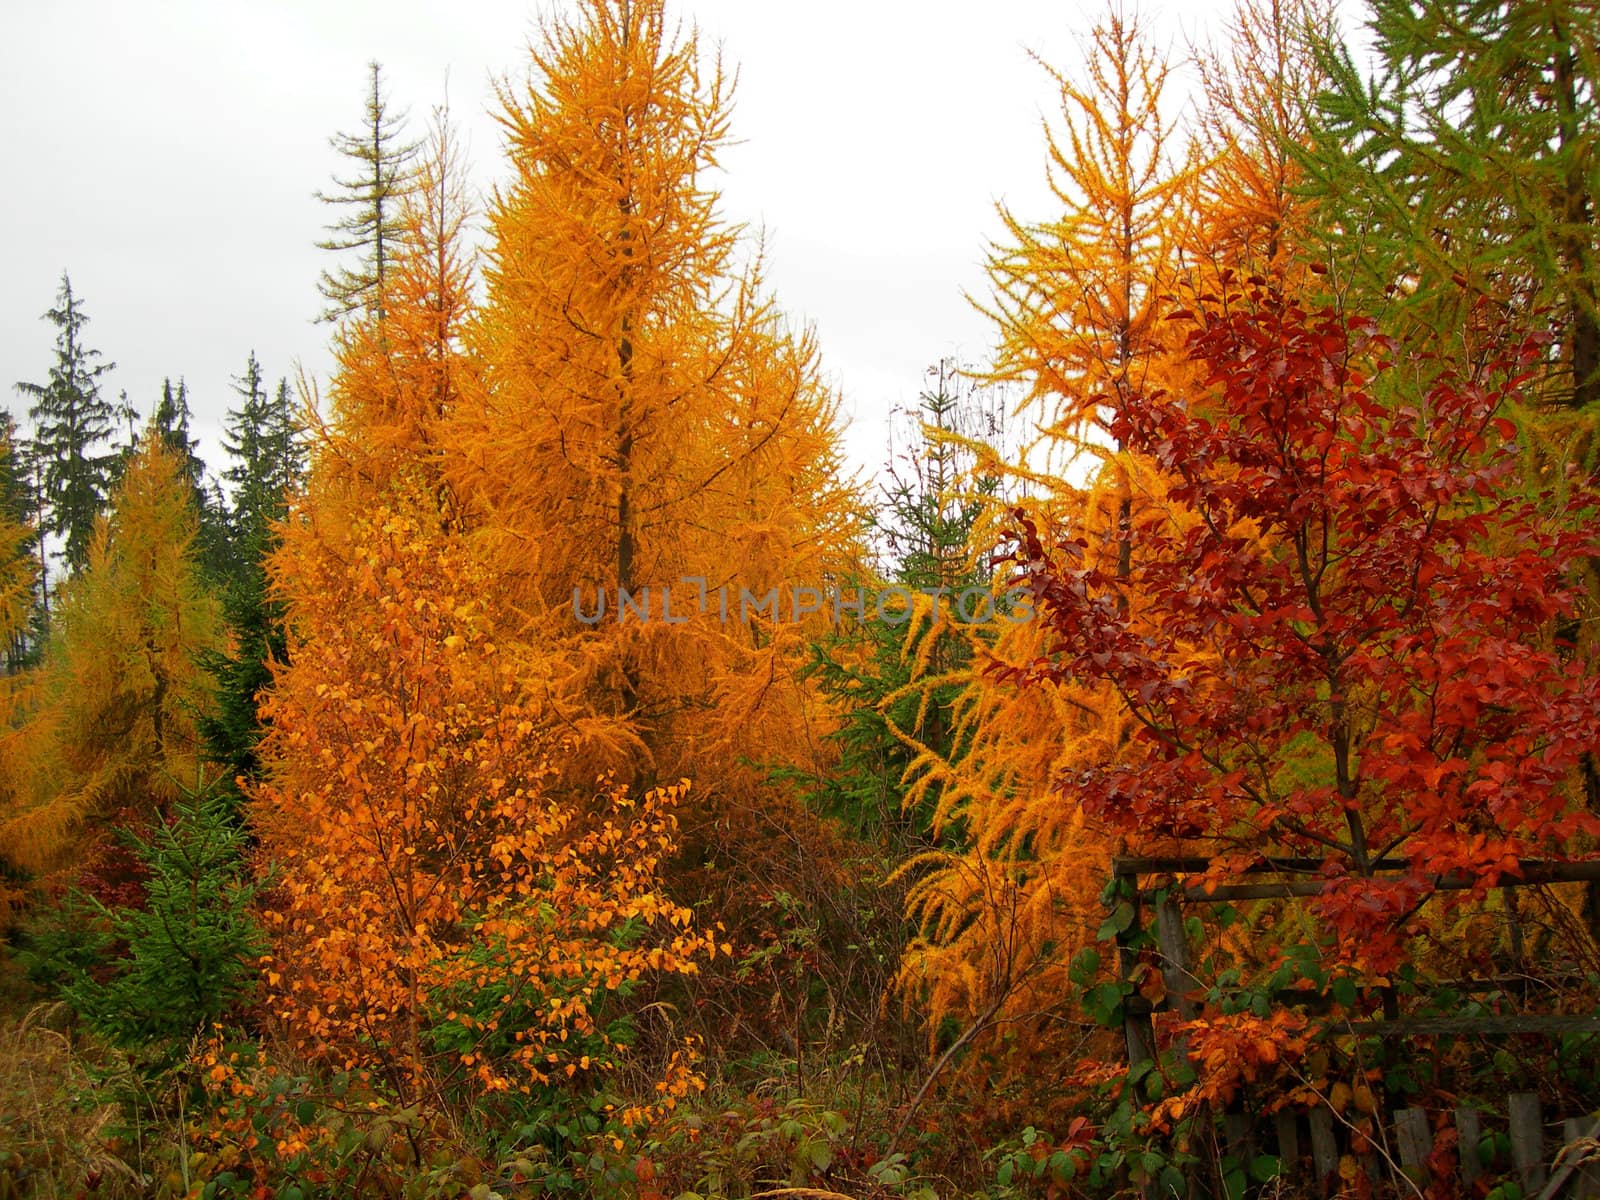           Bright and rich colors of trees in fall season